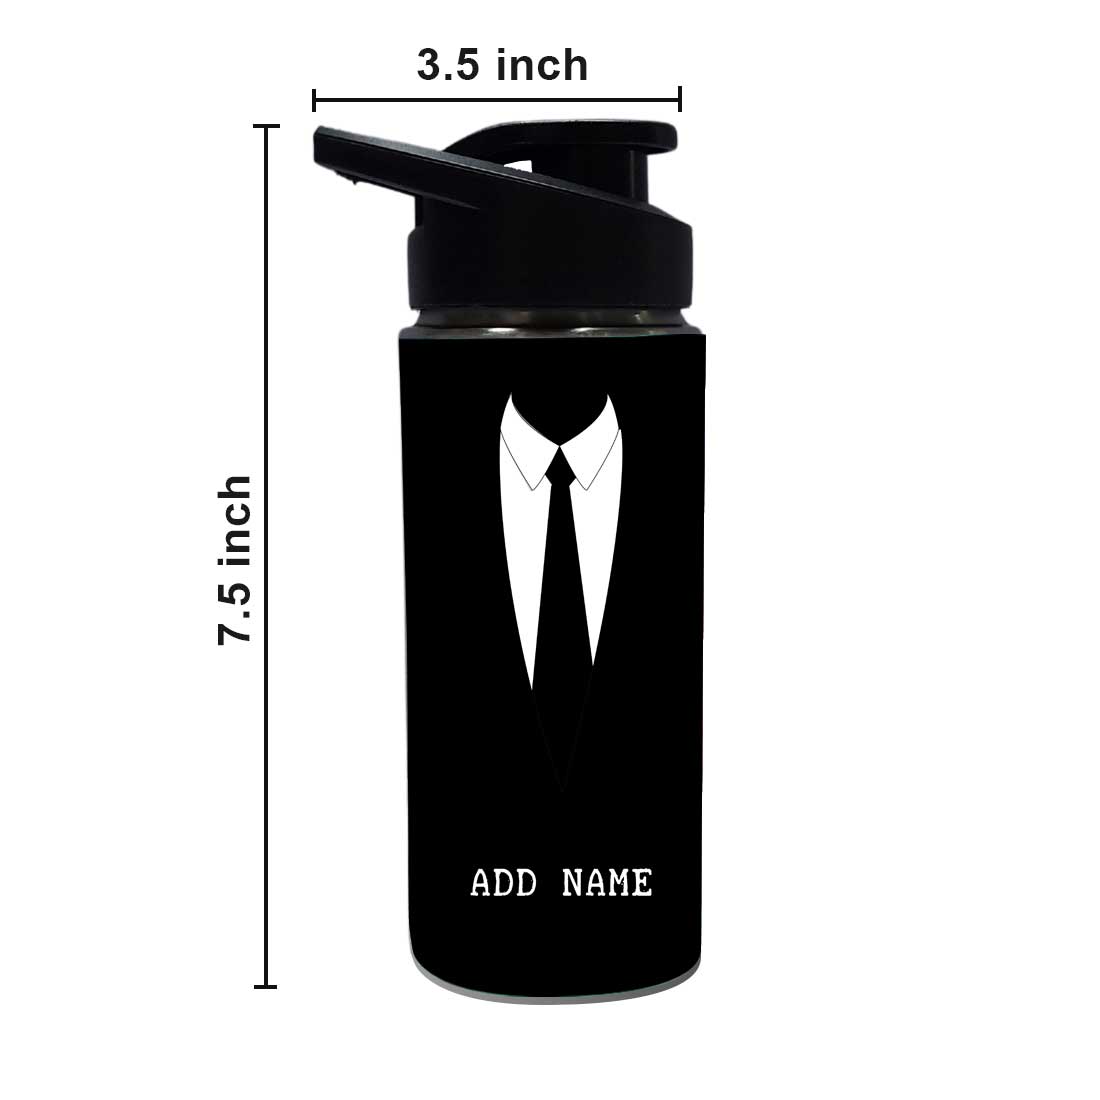 Customized Bottle With Name - Suit Up Nutcase